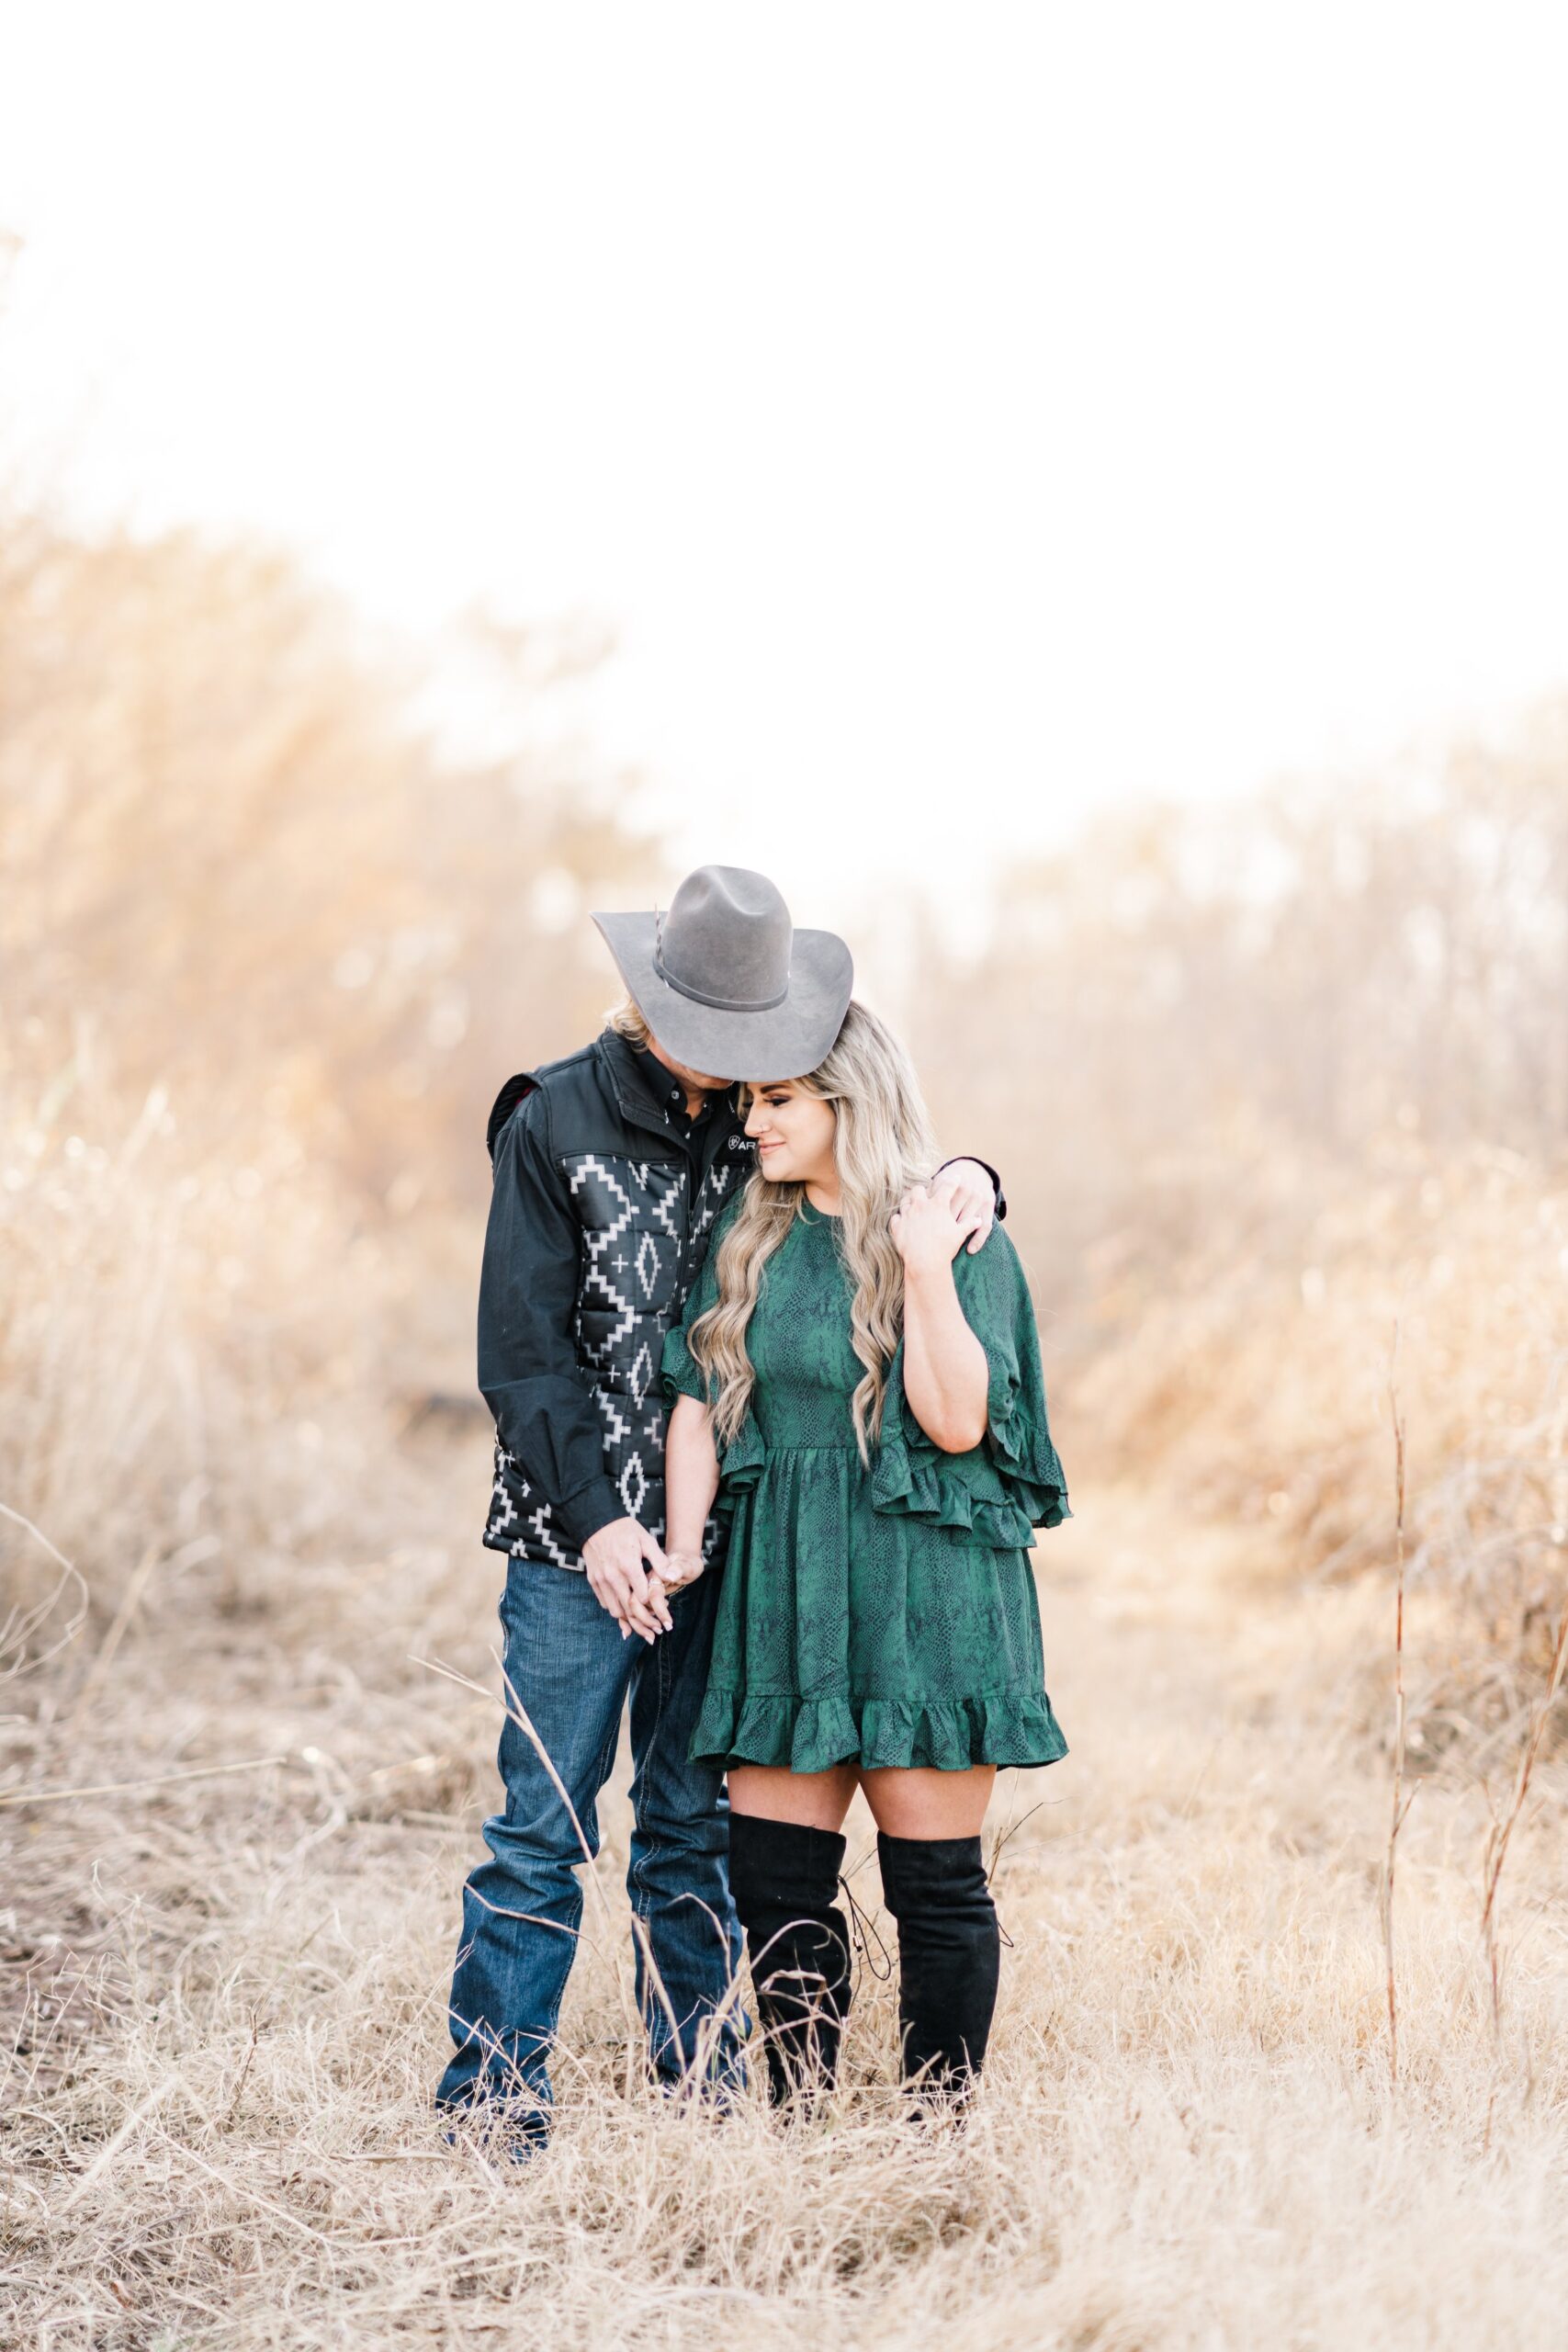 Texas wedding photographer works with newly engaged couple to create beautiful image in a field